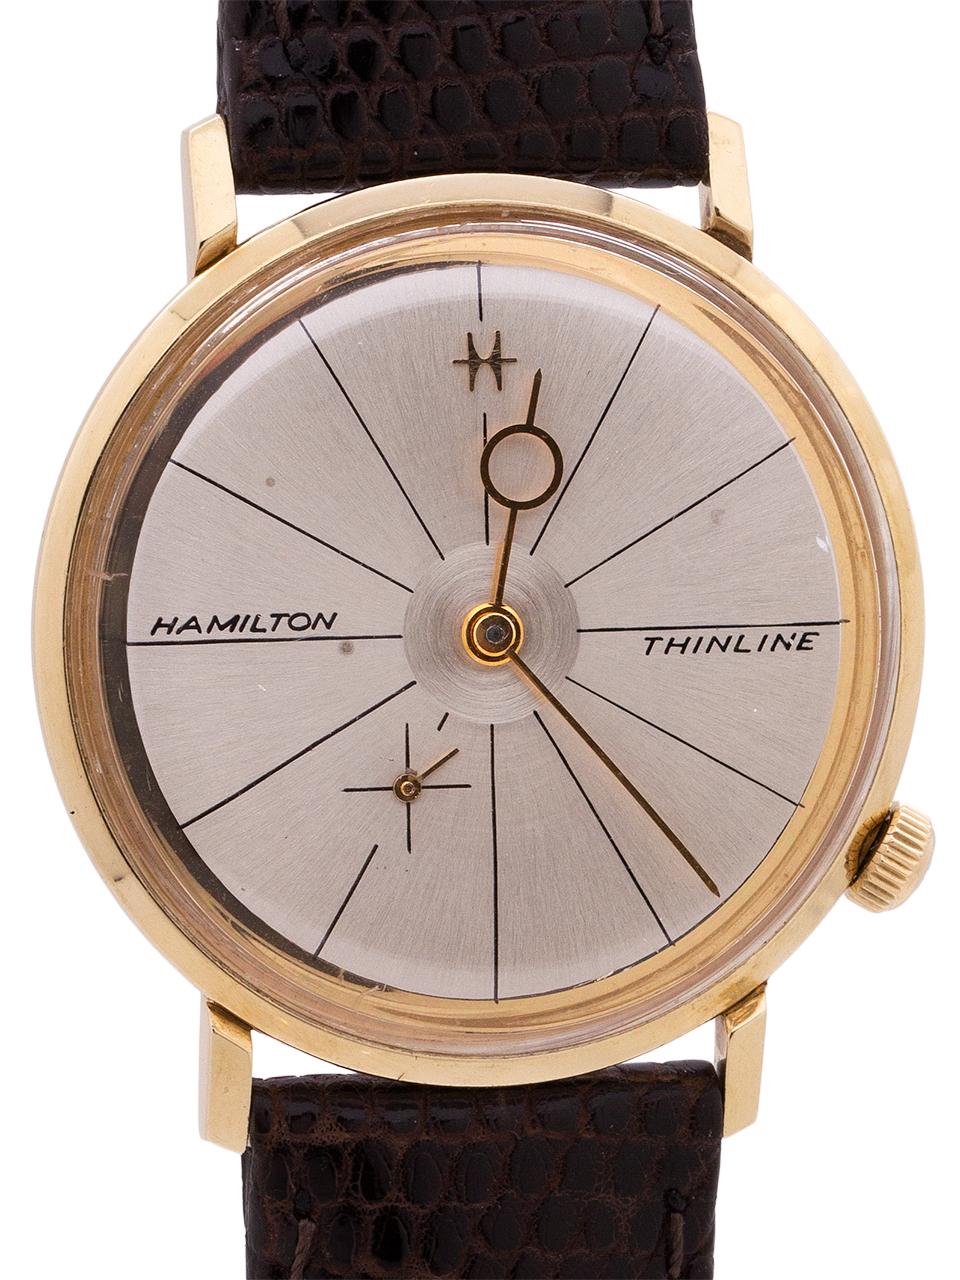 
Hamilton Thinline 4002, a classic design 10K yellow gold filled model from circa 1962. The case measures 33mm, with thin angled lugs, snap down case back, and crown at 4 o’clock. The Thinline 4002 was introduced in 1962, but was destined to only be